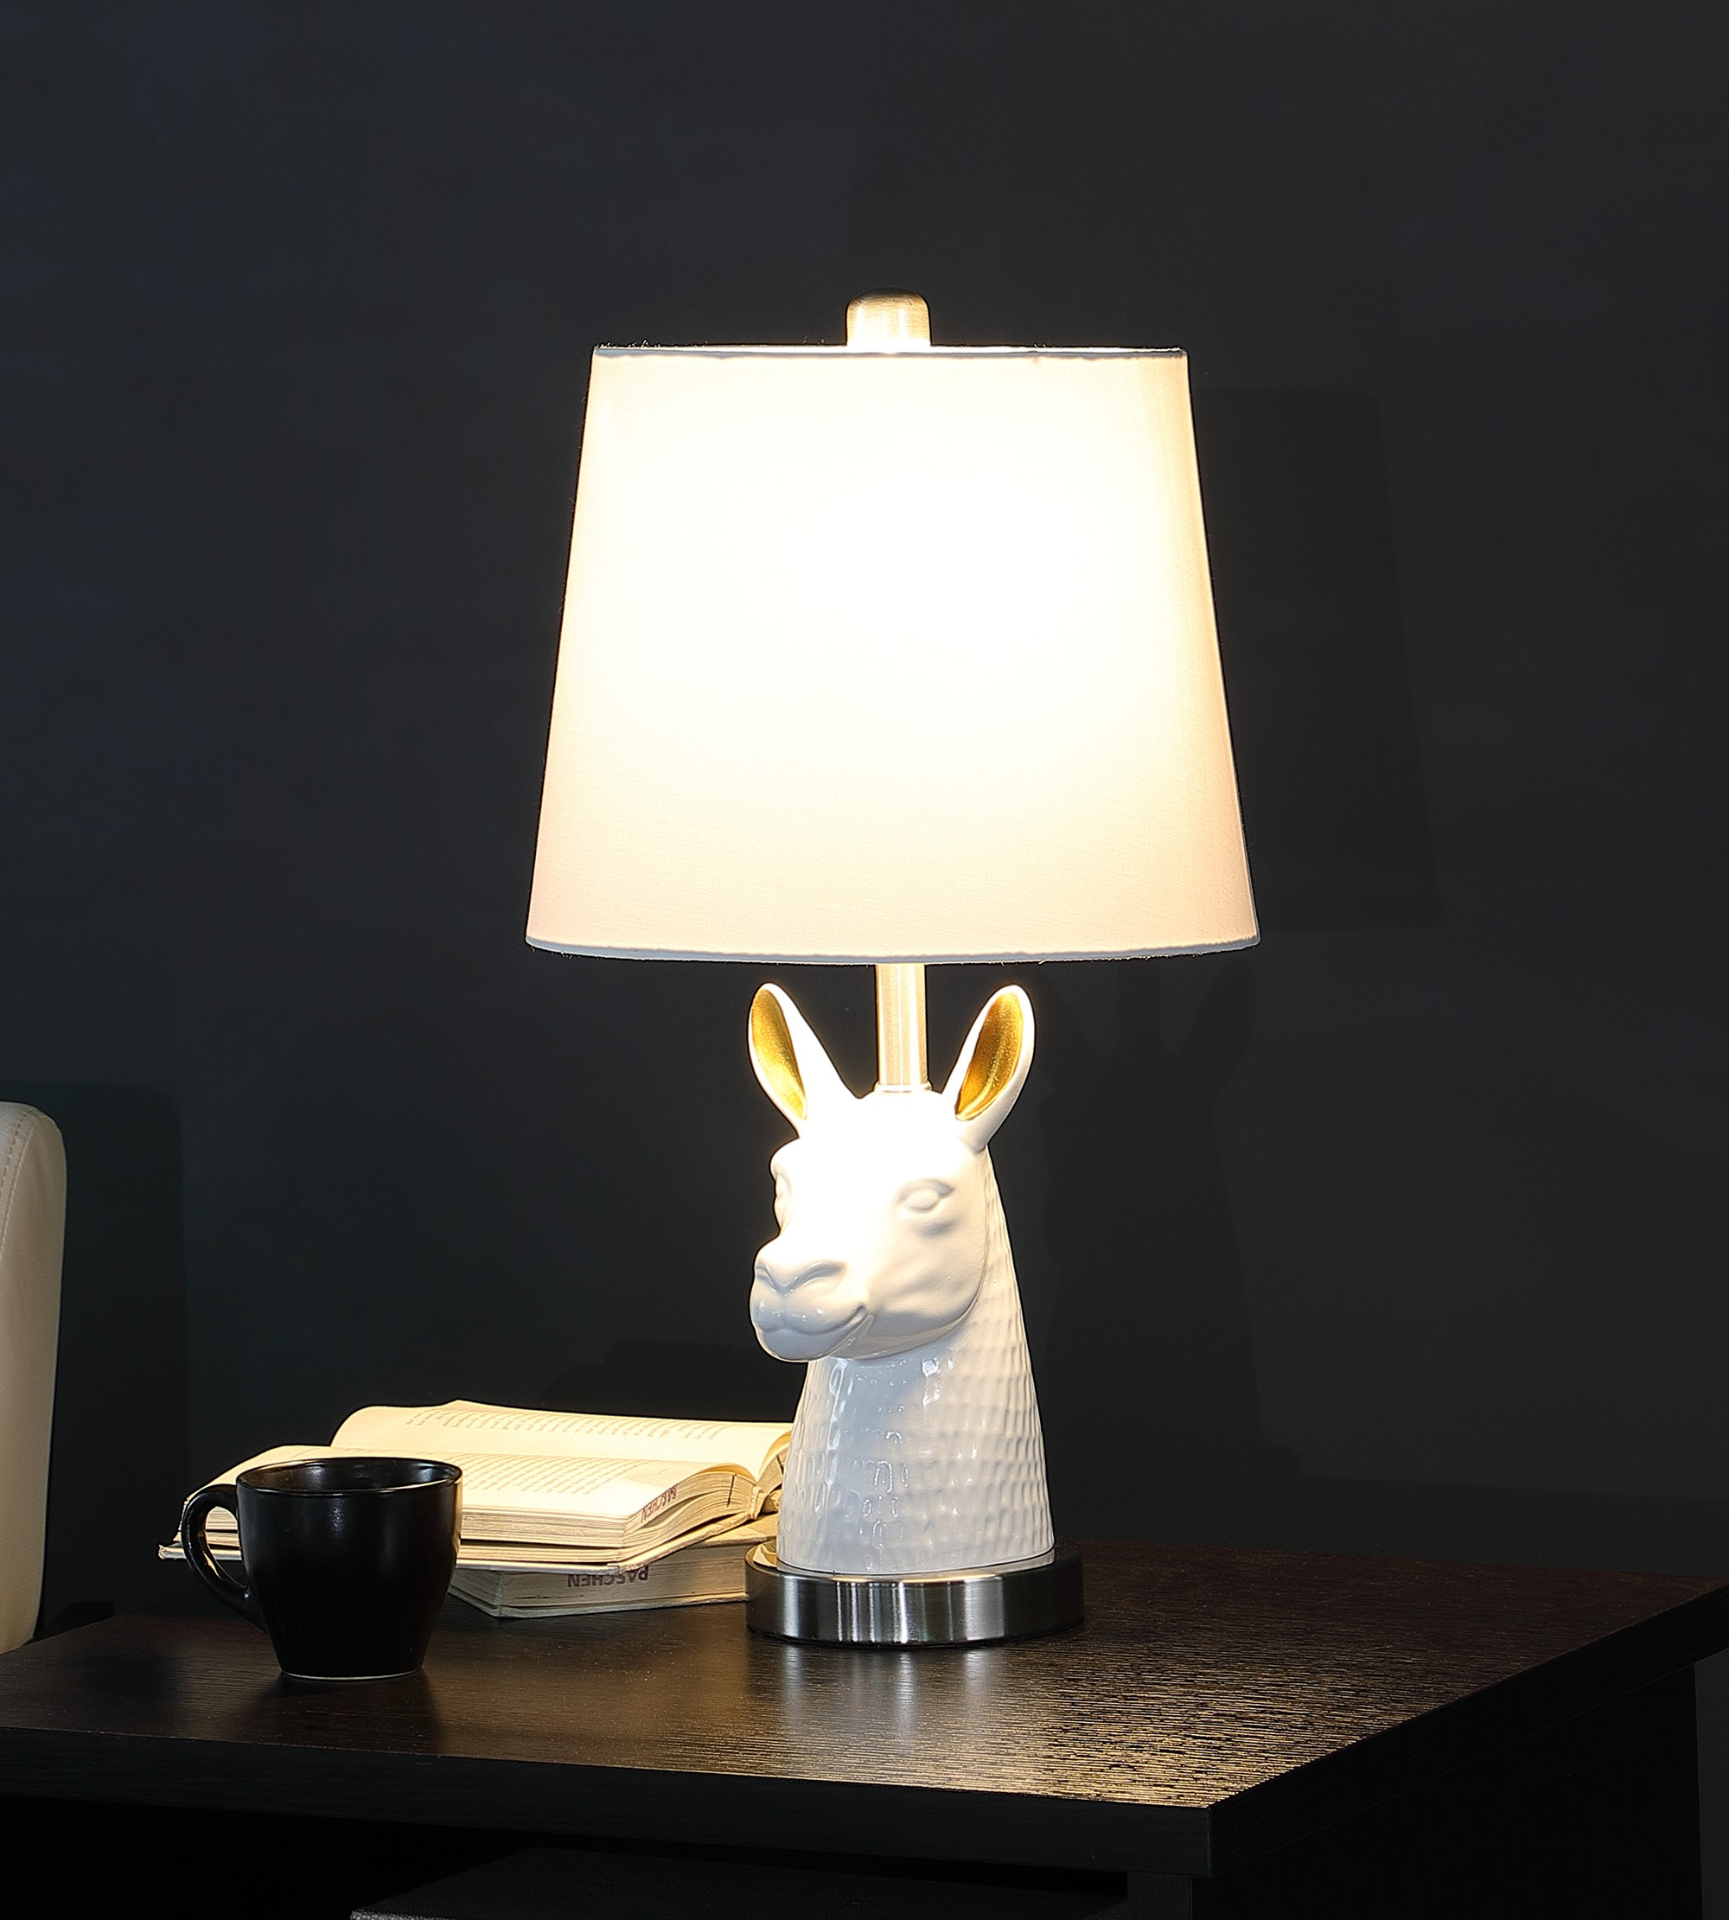 Llama Table Lamp - 21” White and Gold - Higher Gallery Home OFfice